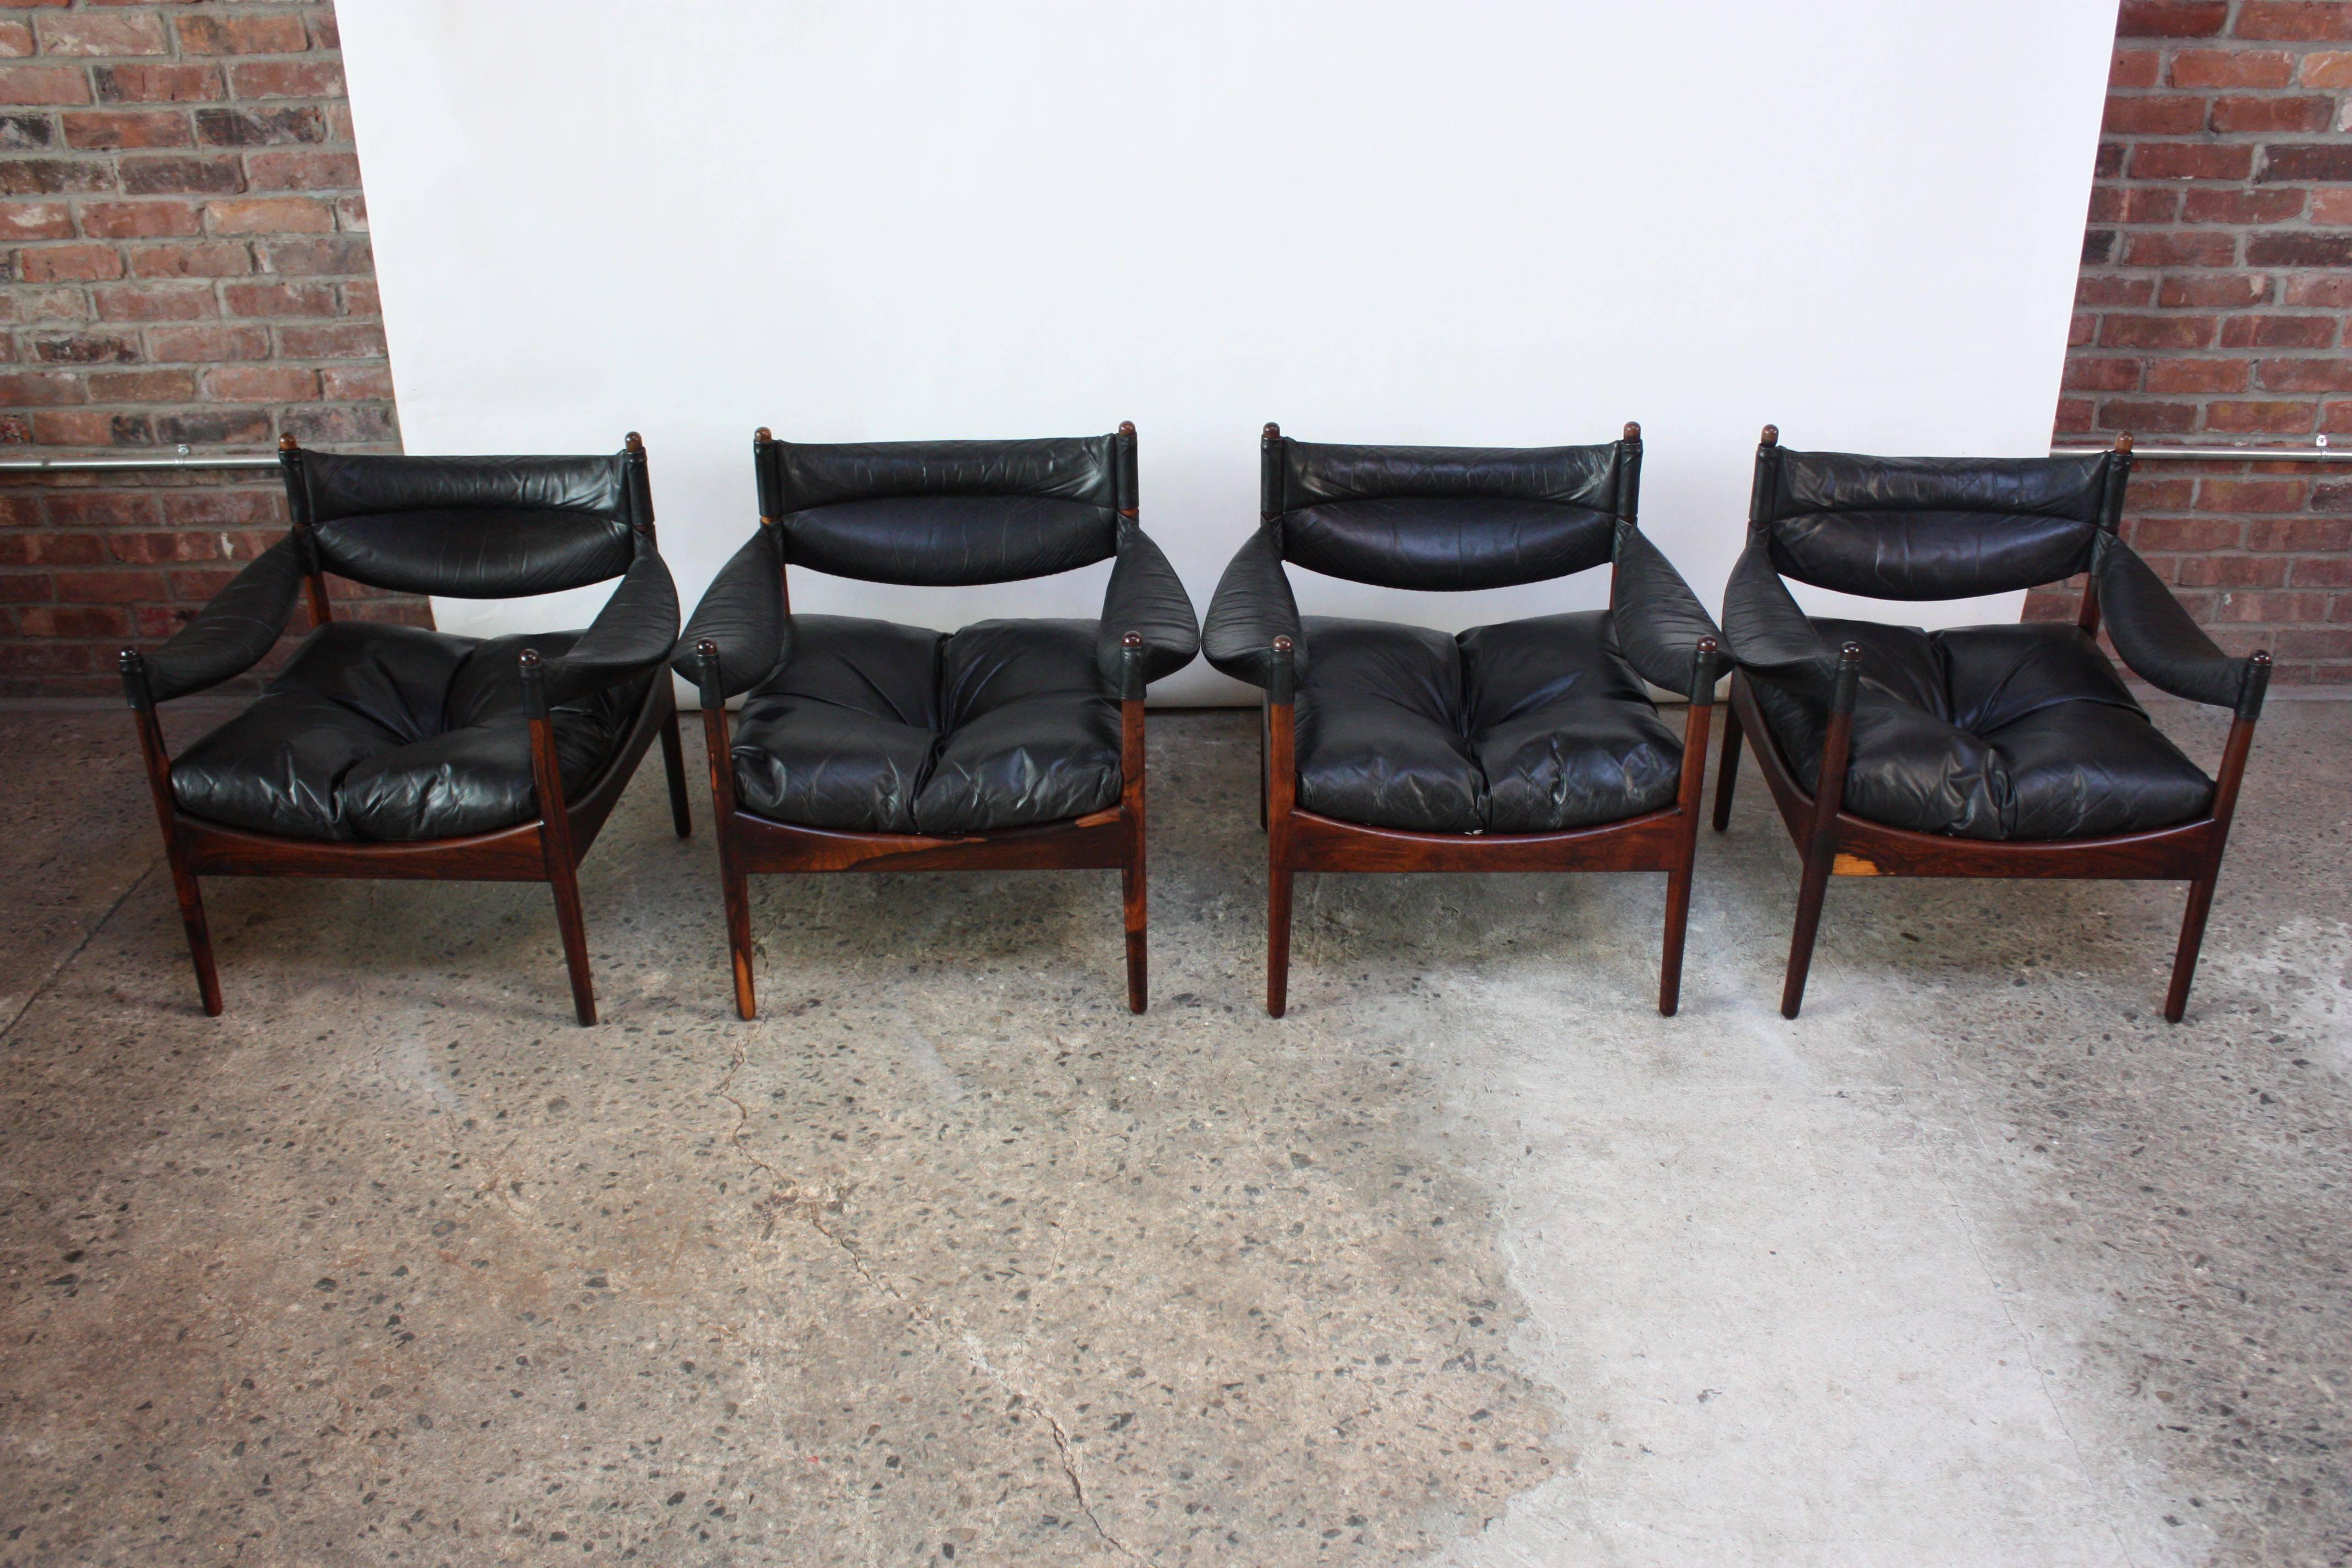 This set of four rosewood and black leather 'Modus' lounge chairs were designed by Kristian Solmer Vedel for Søren Willadsen in 1963. Composed of removable leather armrests, backrests, and seats for easy cleaning. The seat cushions are supported by